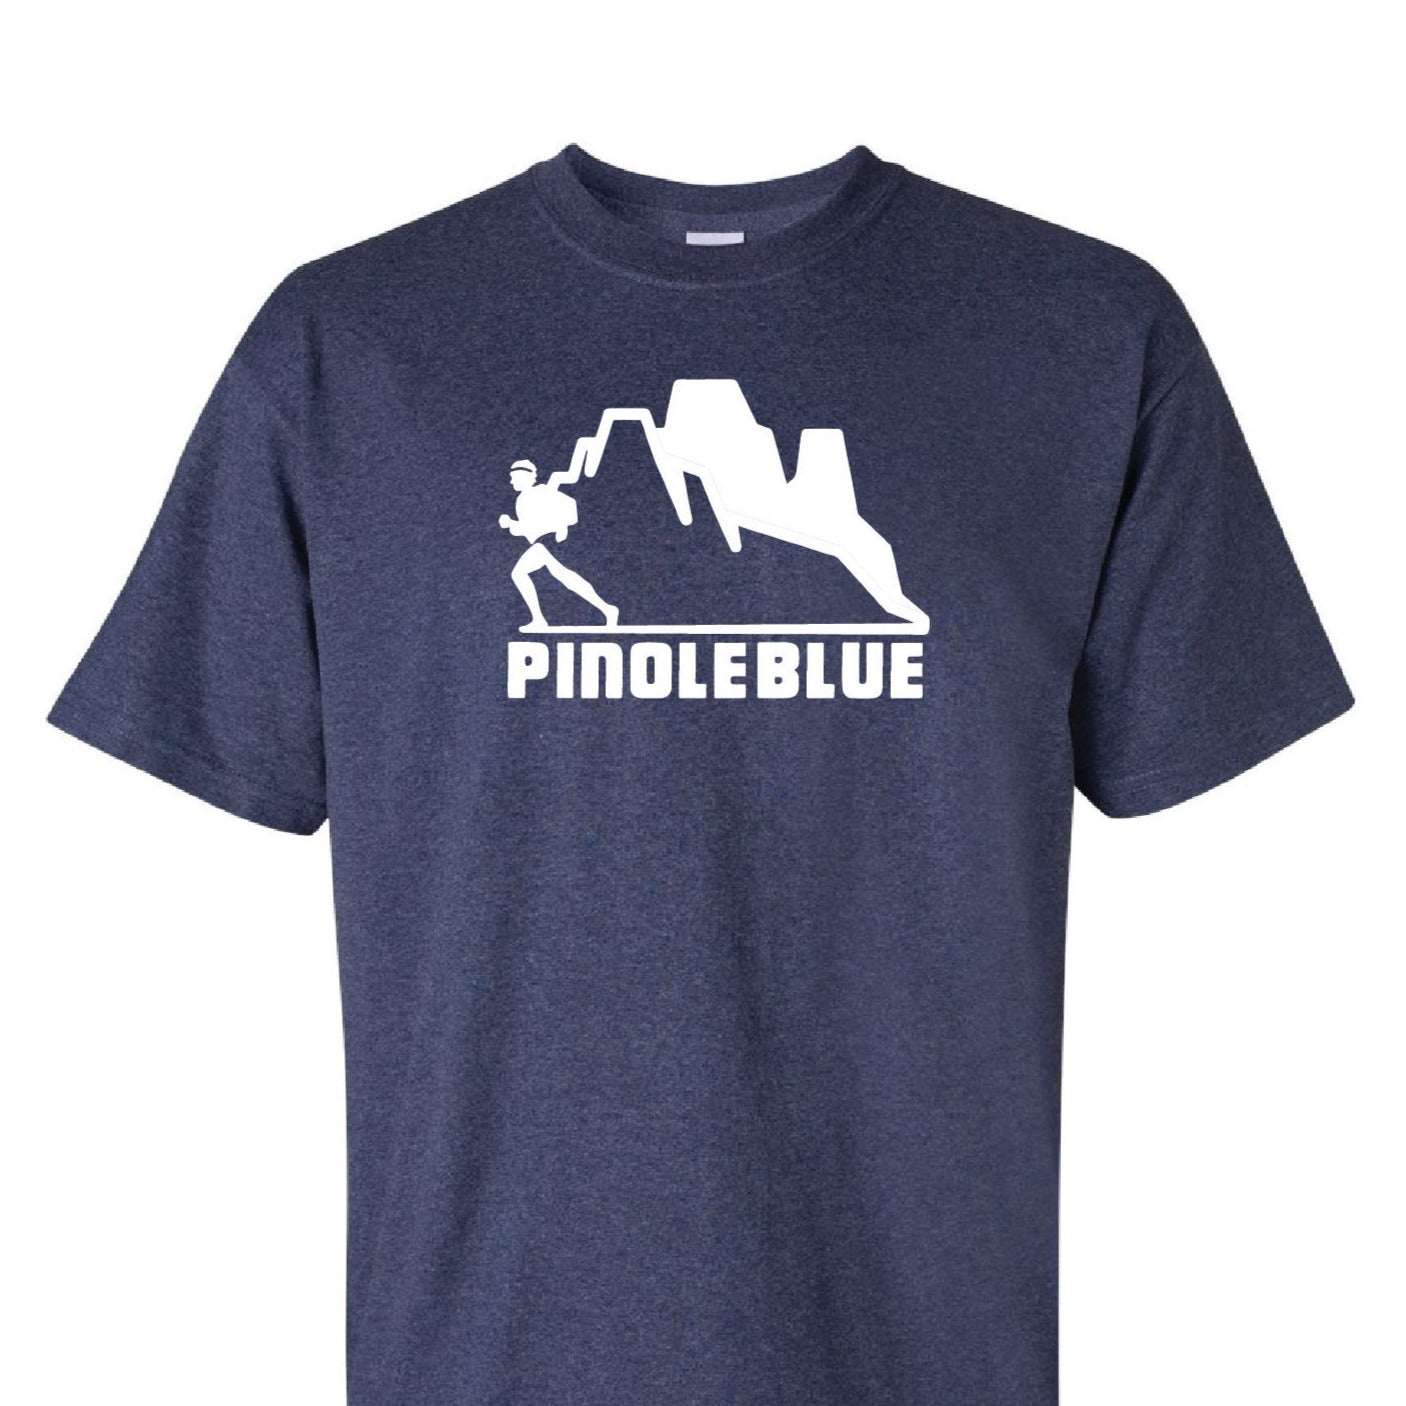 Front of a heathered blue t-shirt with a white Pinole Blue logo.